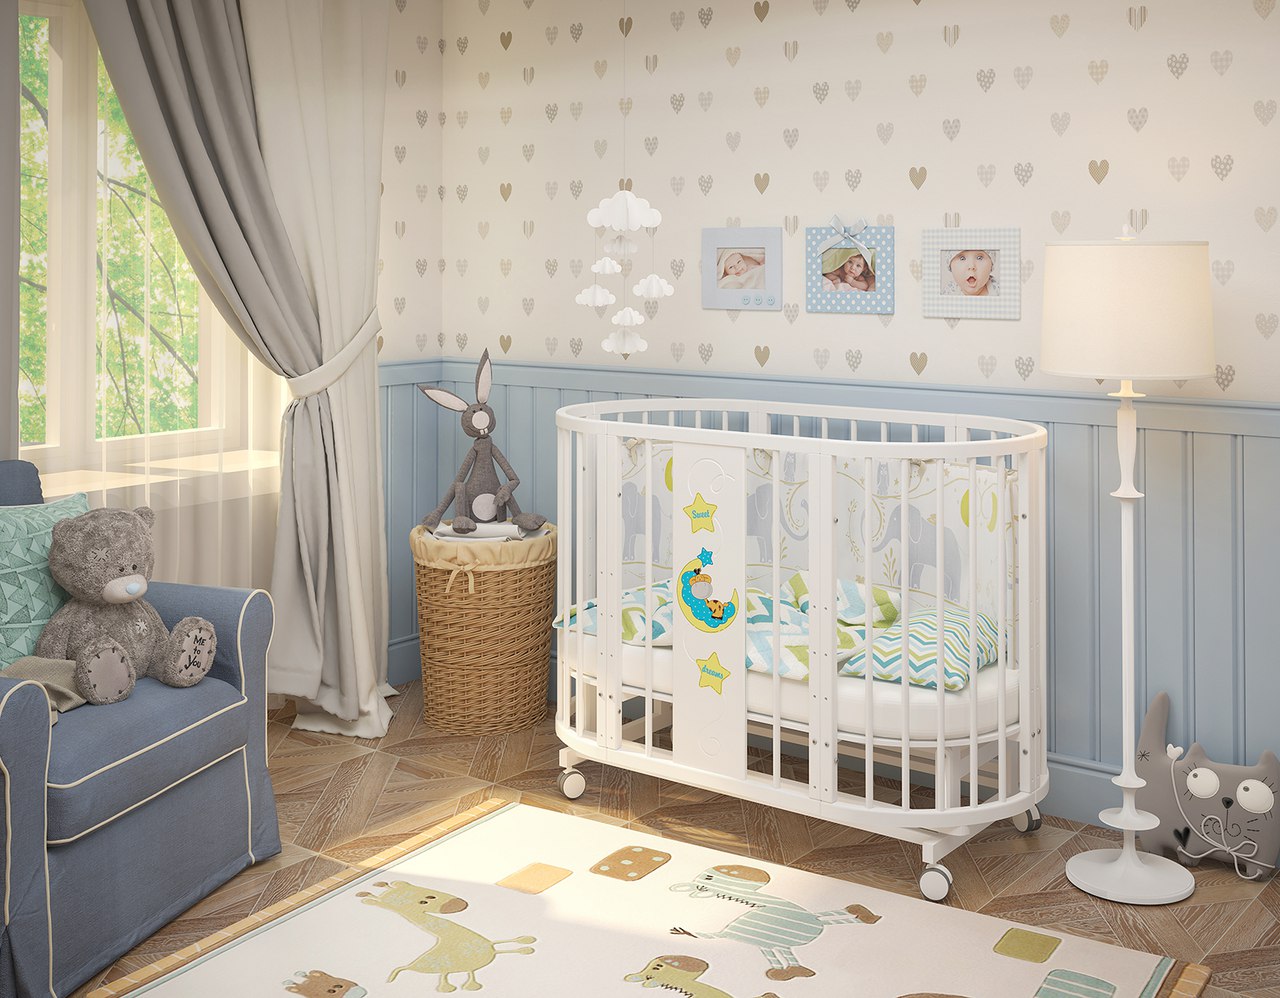 Children's rooms in 3d max vray 3.0 image